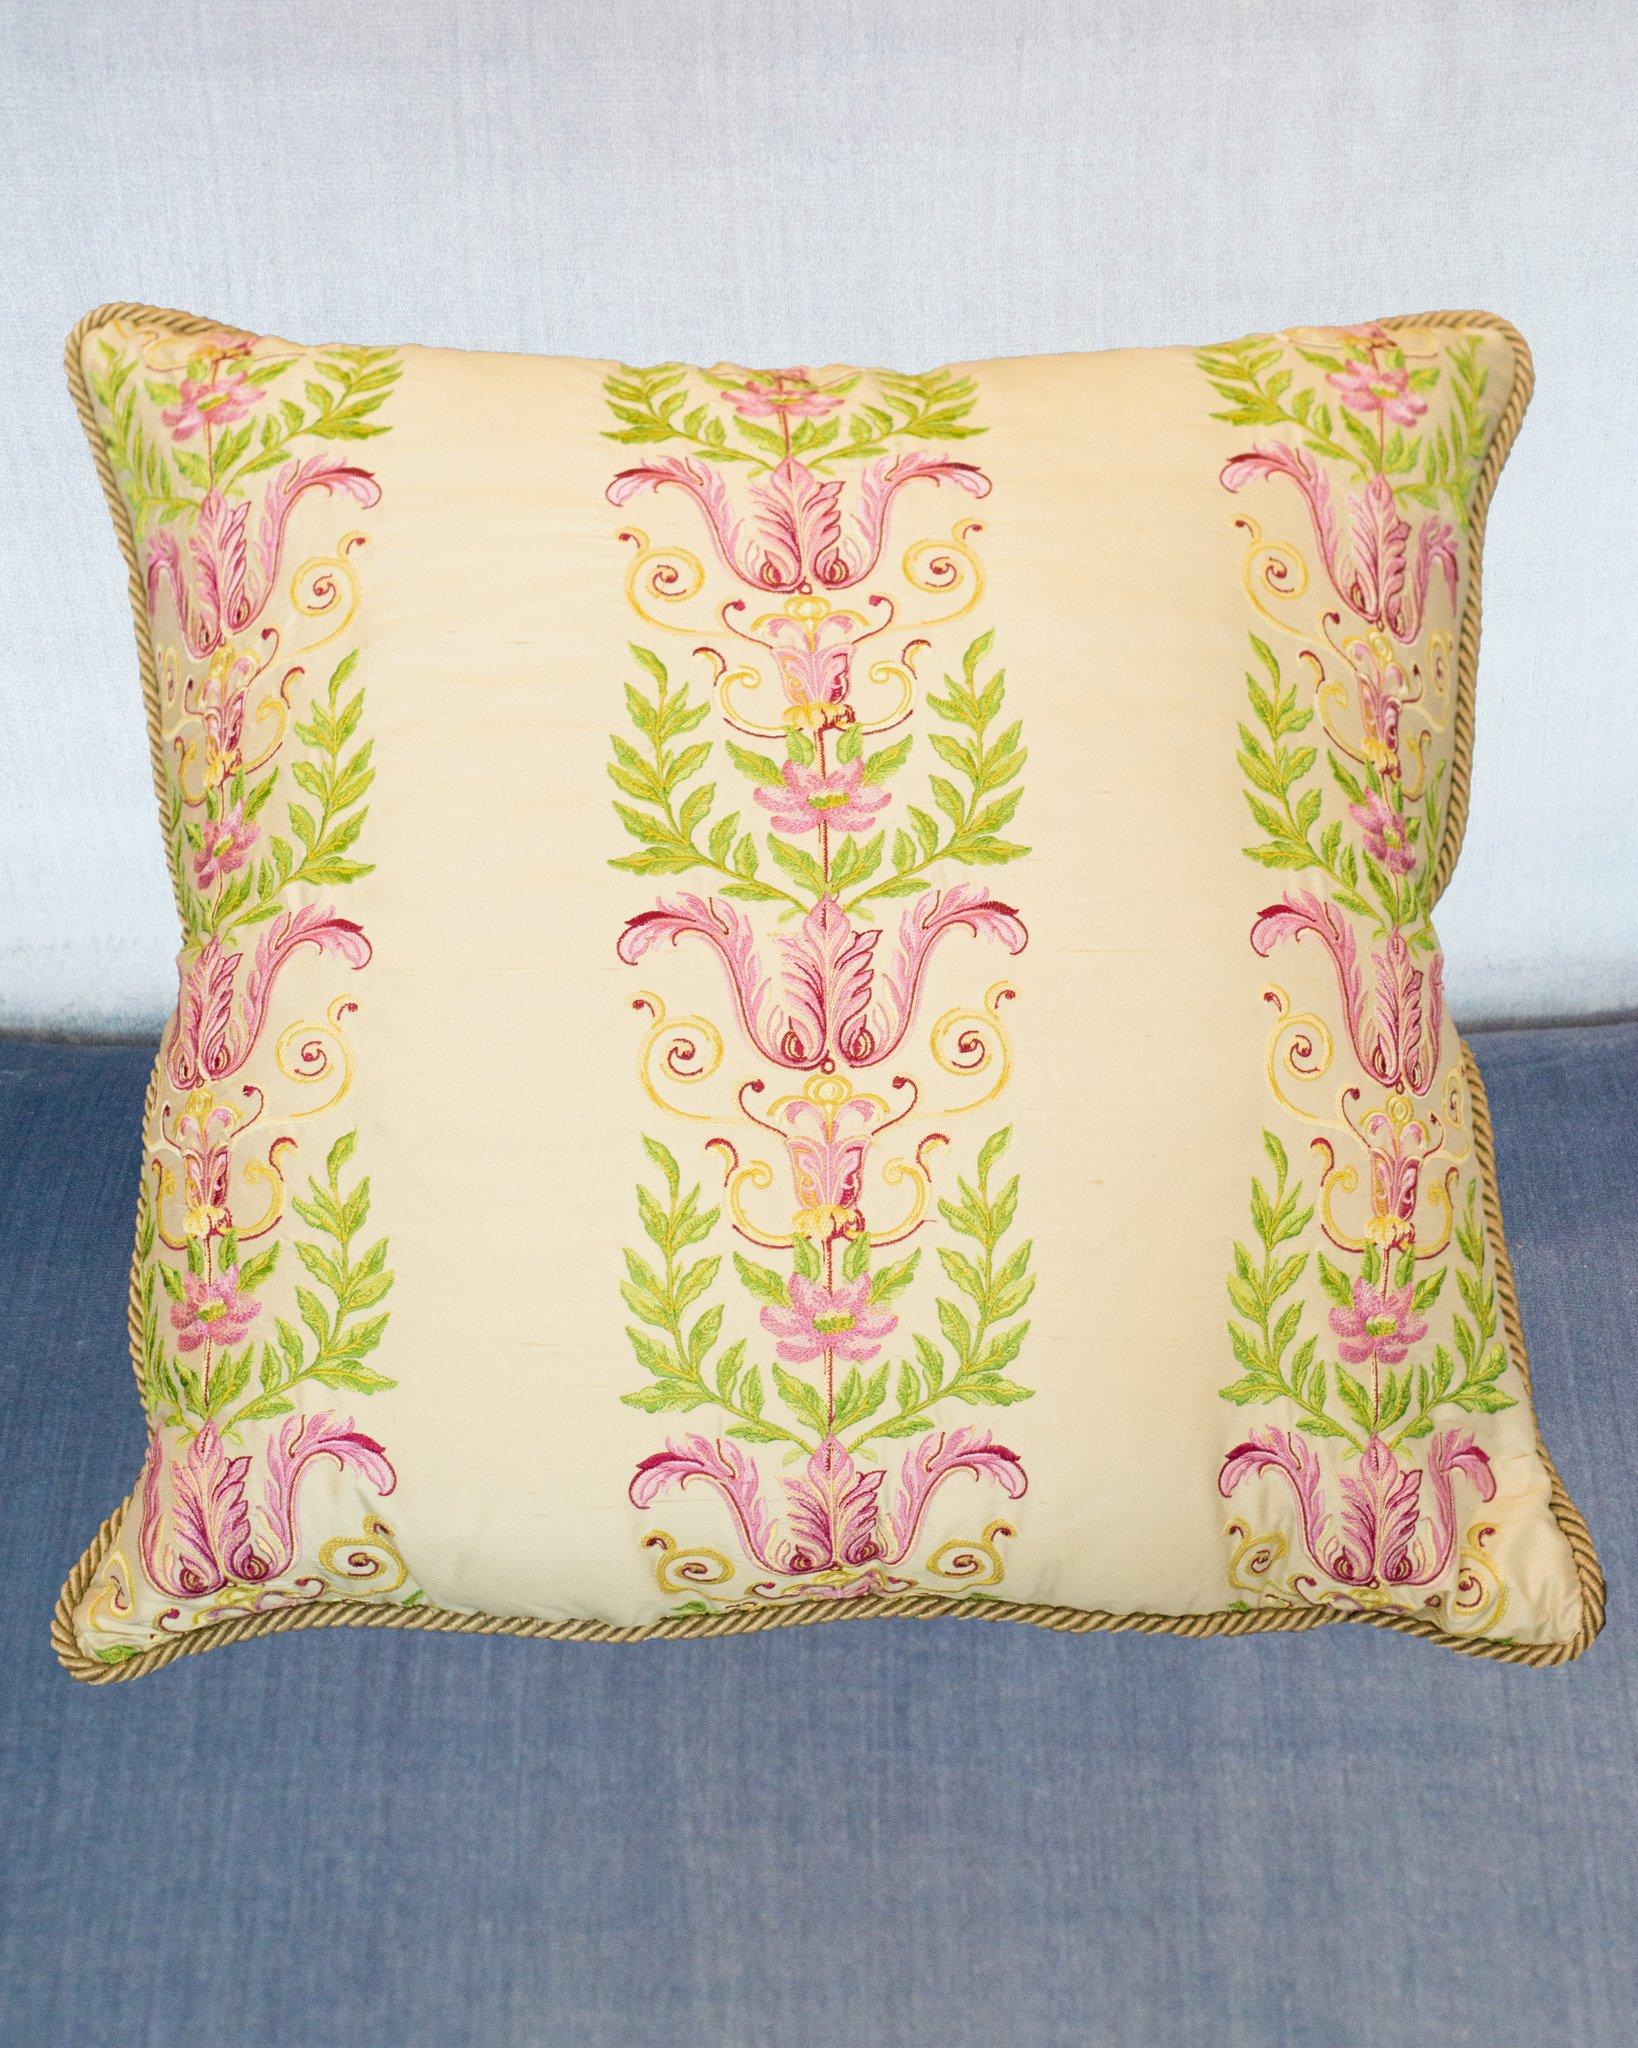 A large Studio Maison Nurita handmade pillow with green and pink embroidery on crème silk, backed in a green cotton velvet with gold metallic rope, down filled.